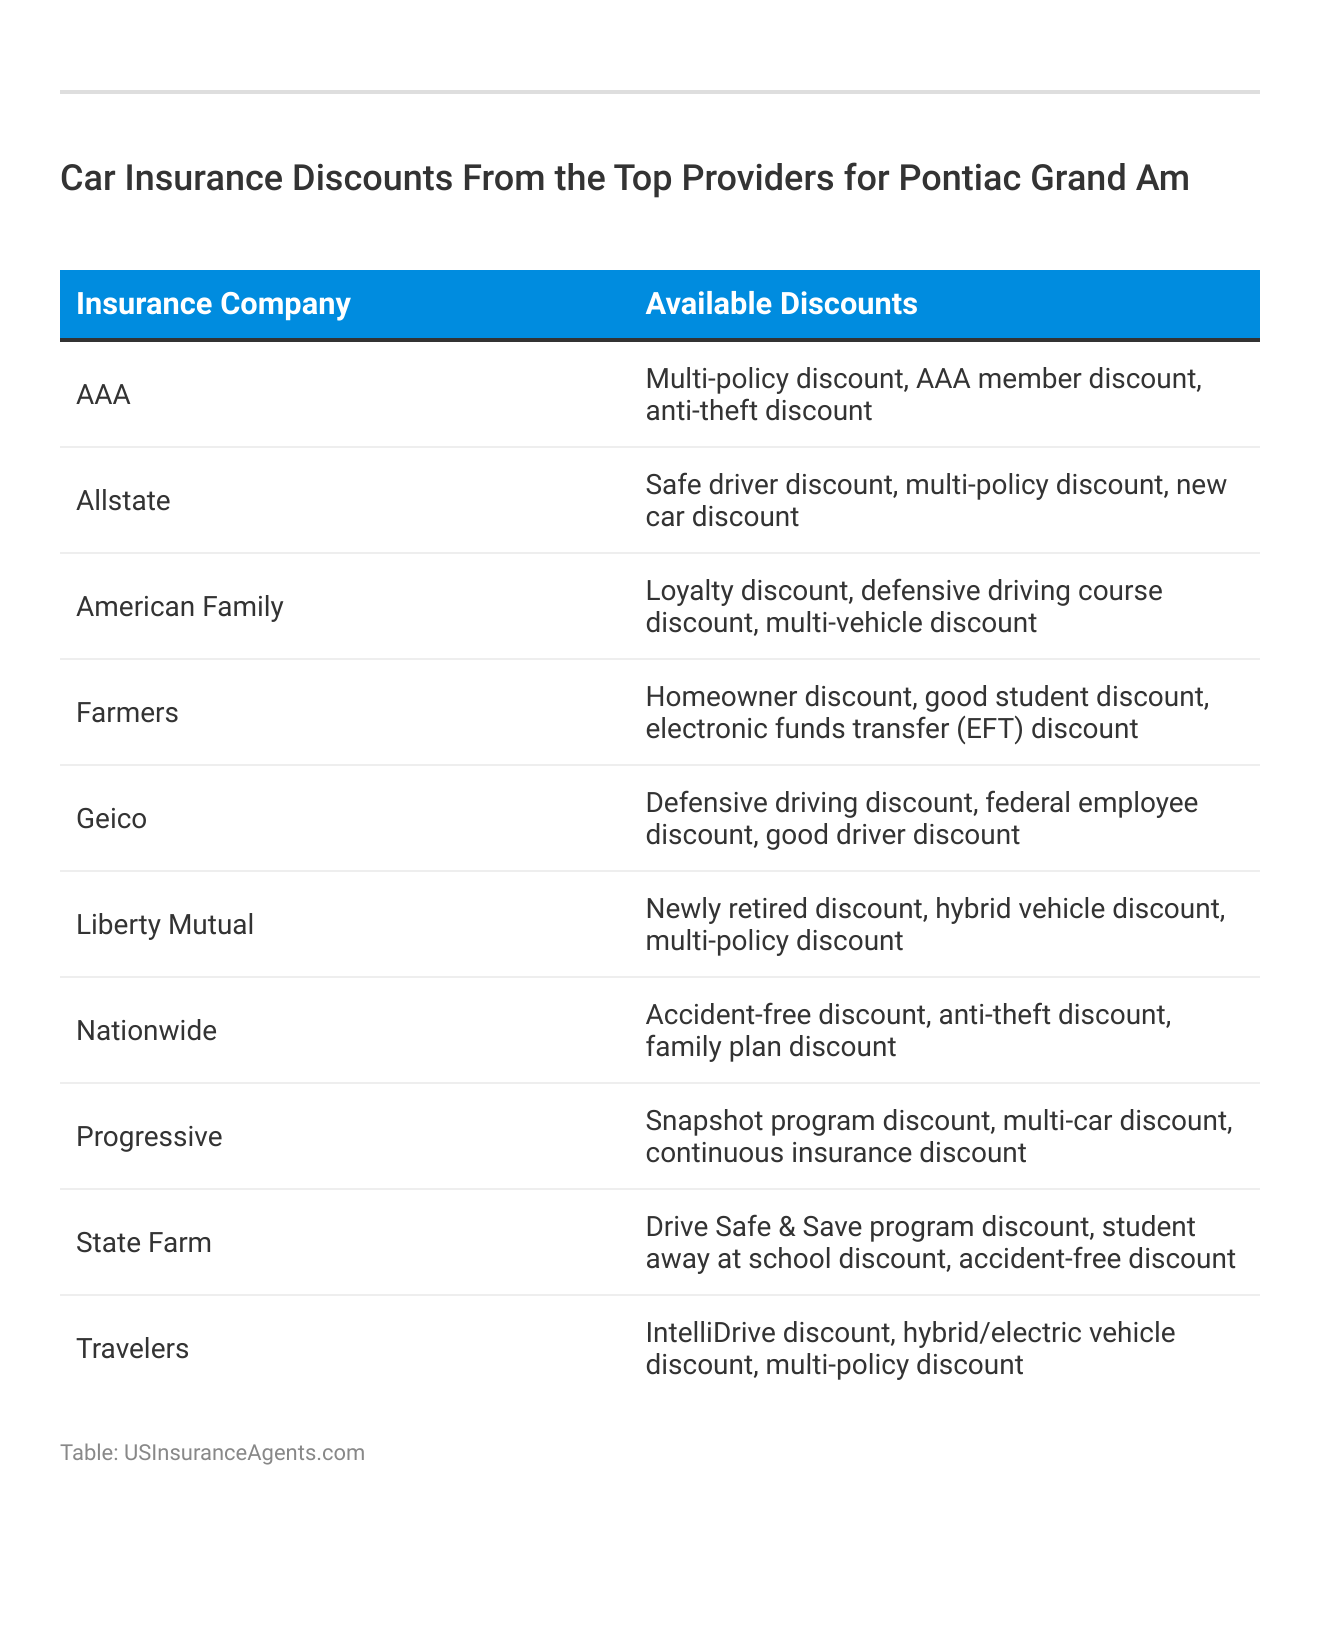 <h3>Car Insurance Discounts From the Top Providers for Pontiac Grand Am</h3>